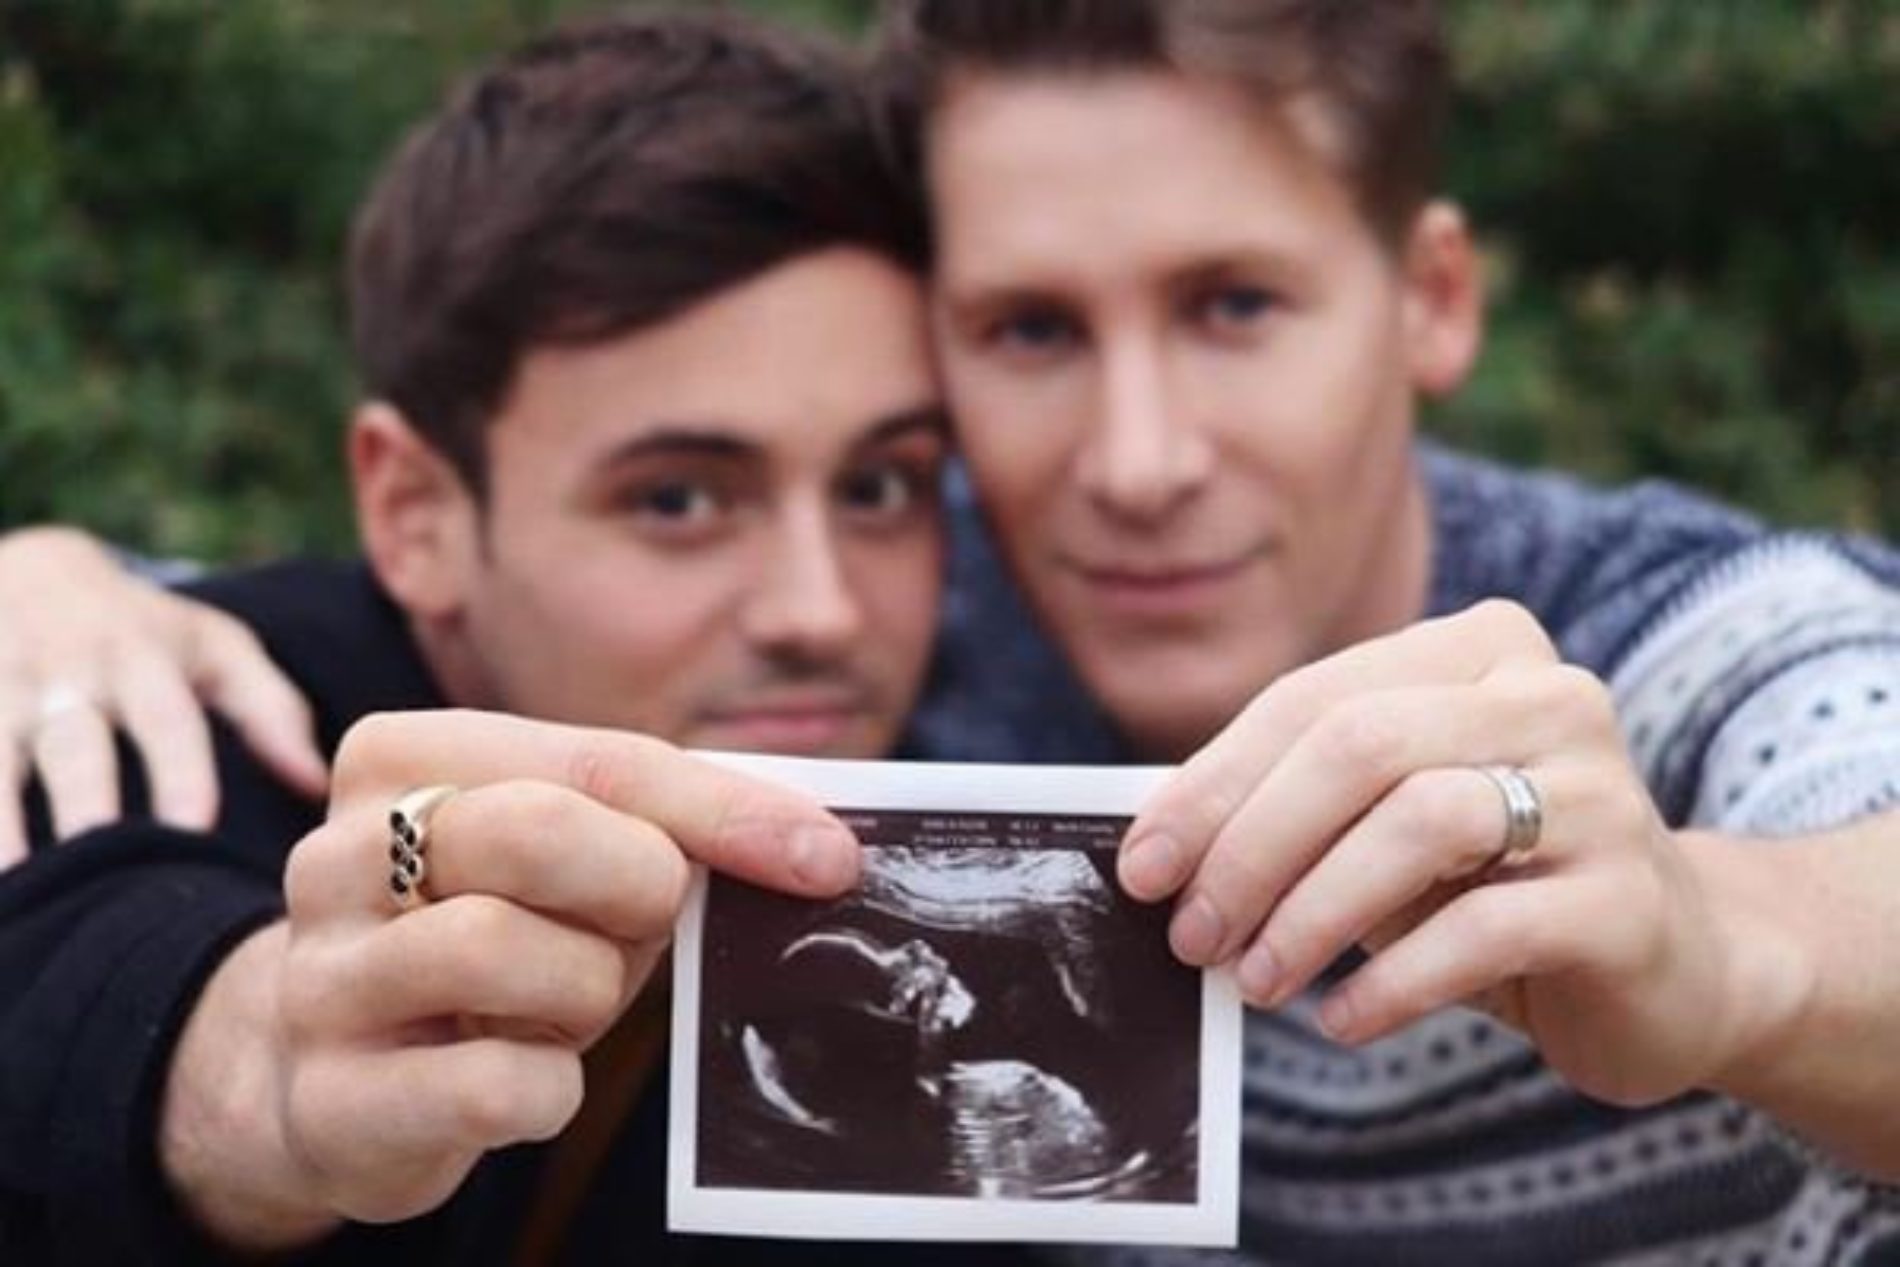 Homophobic Trolls are not happy that Tom Daley and Dustin Lance Black are having a baby